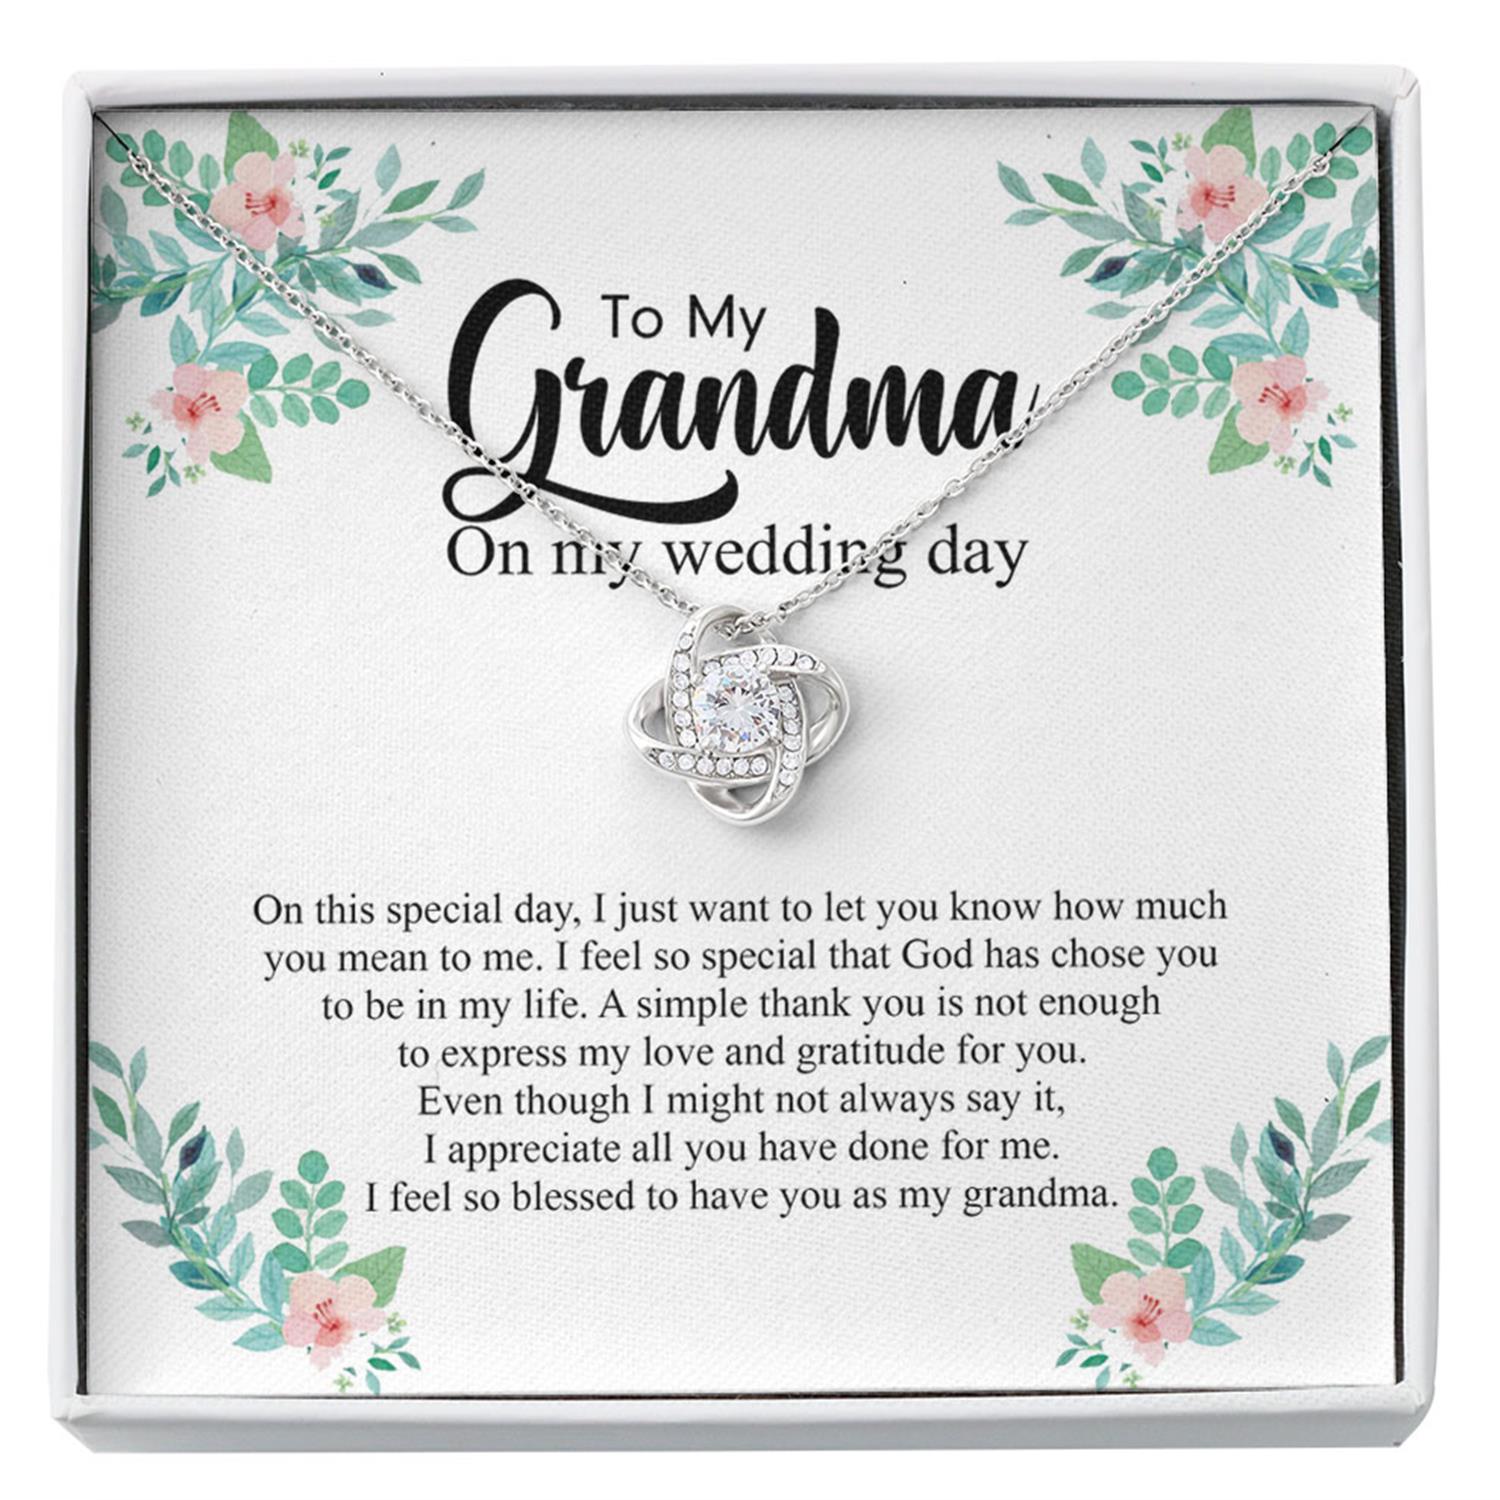 Grandmother Necklace, Grandmother Of The Bride Gift Necklace, Grandma Of The Groom Gift, Grandmother Wedding Gift, Nana, Grammie Custom Necklace